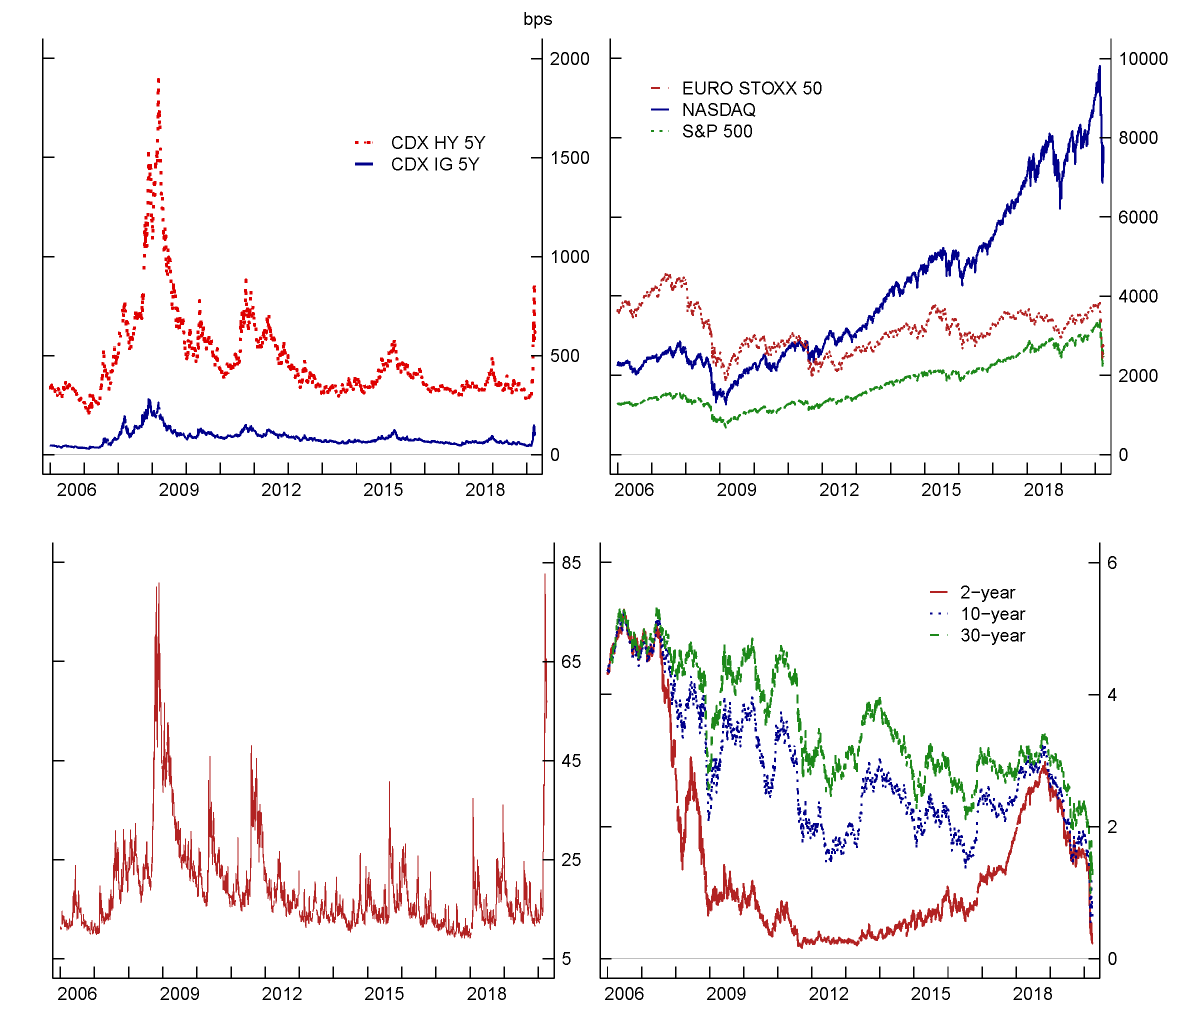 Figure 13: Selected market risk factors. Panel A: U.S. Treasuries Yield Curve Rate. Panel B: Equities. Panel C: VIX Index. Panel D: Markit CDX Indices. See accessible link for data.